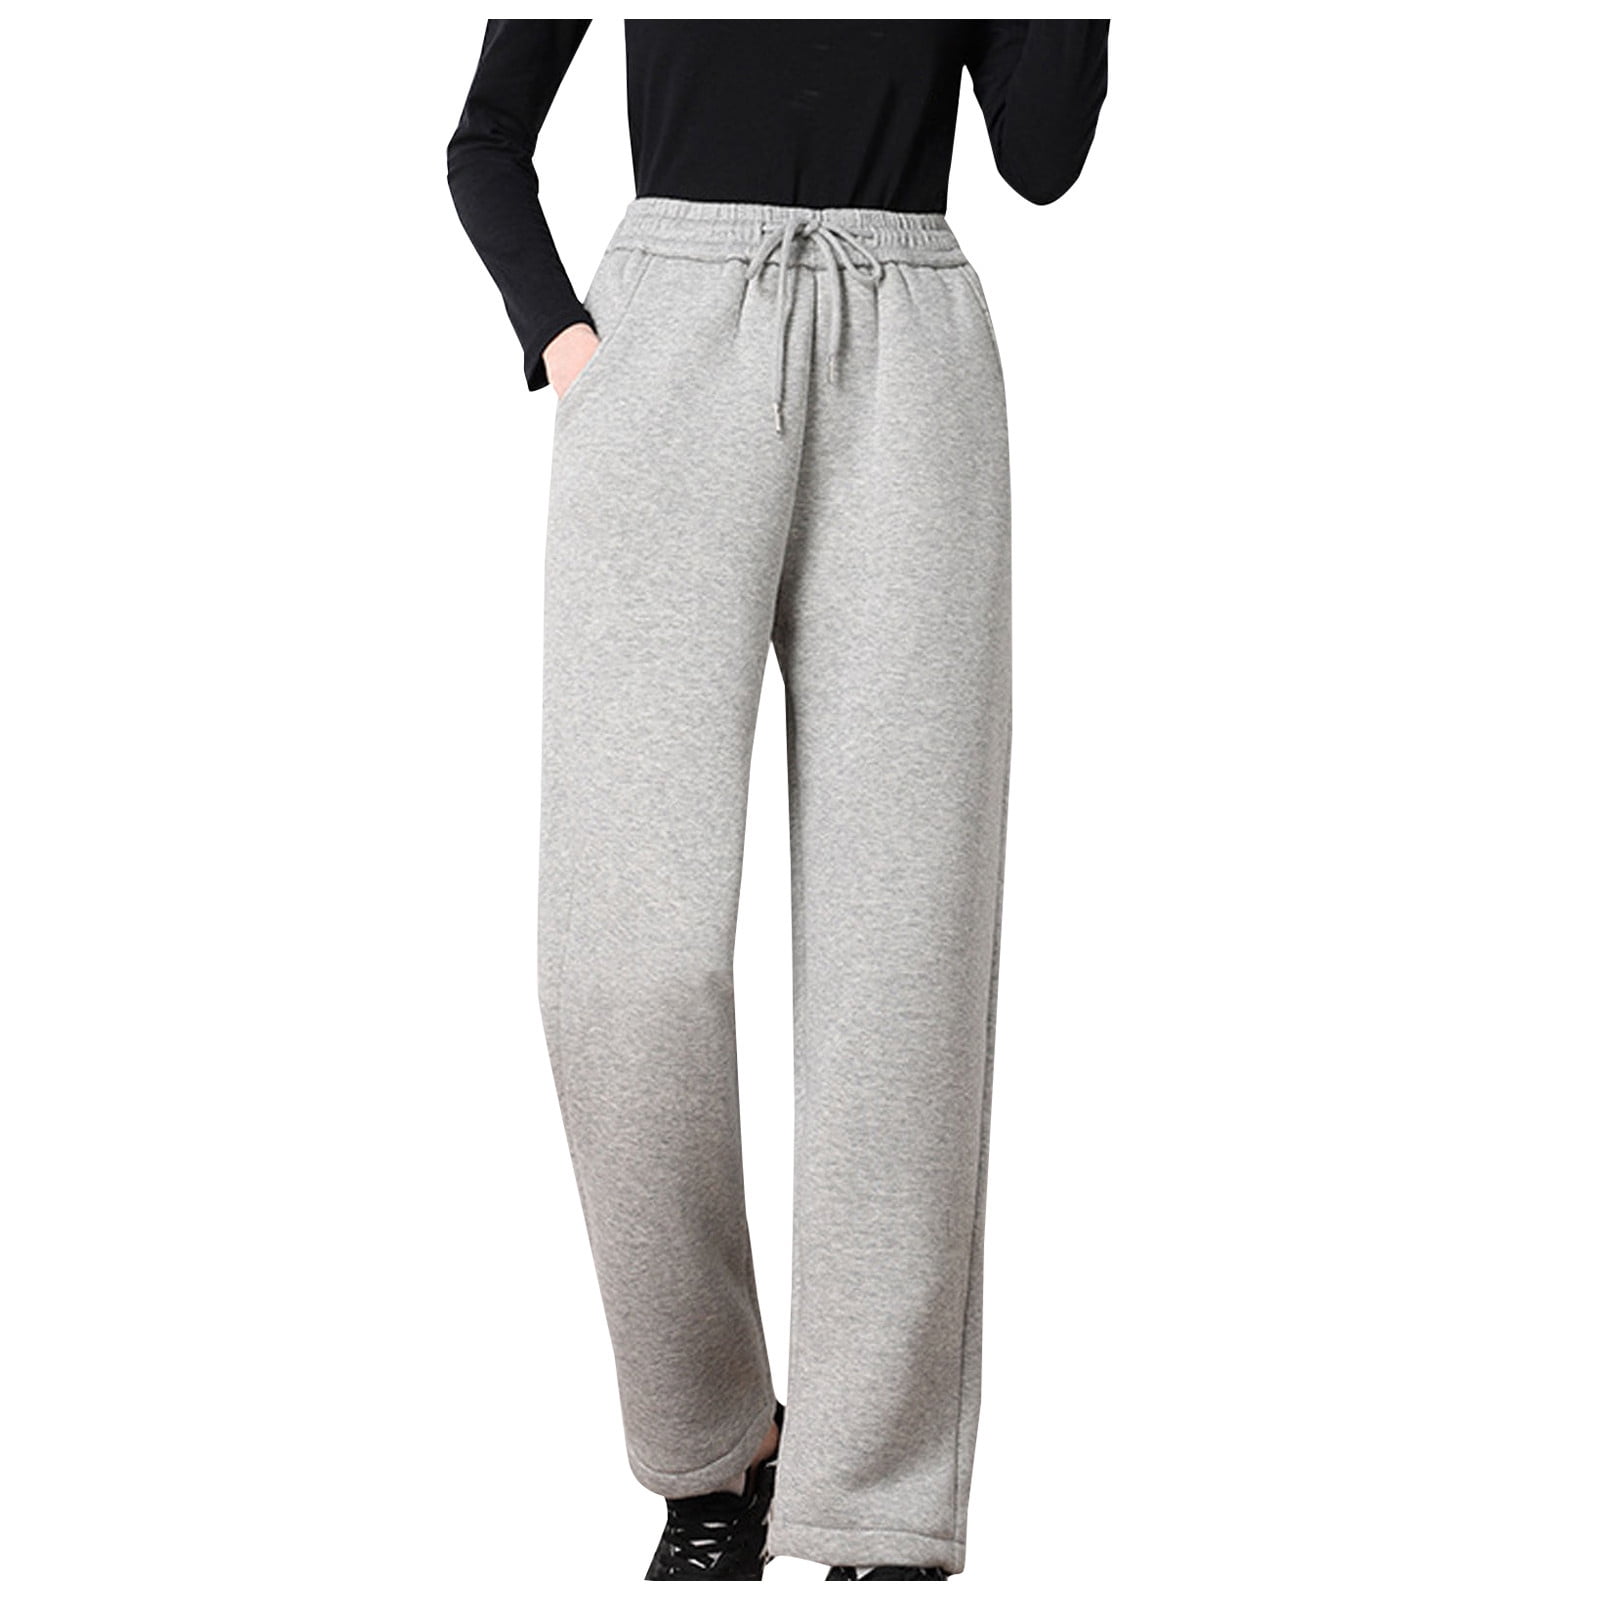 Women's Fleece Sweatpants Sherpa Lined Pants Winter Warm Drawstring Cozy  Plus Size Lounge Trousers with Pockets Ladies Clothes 